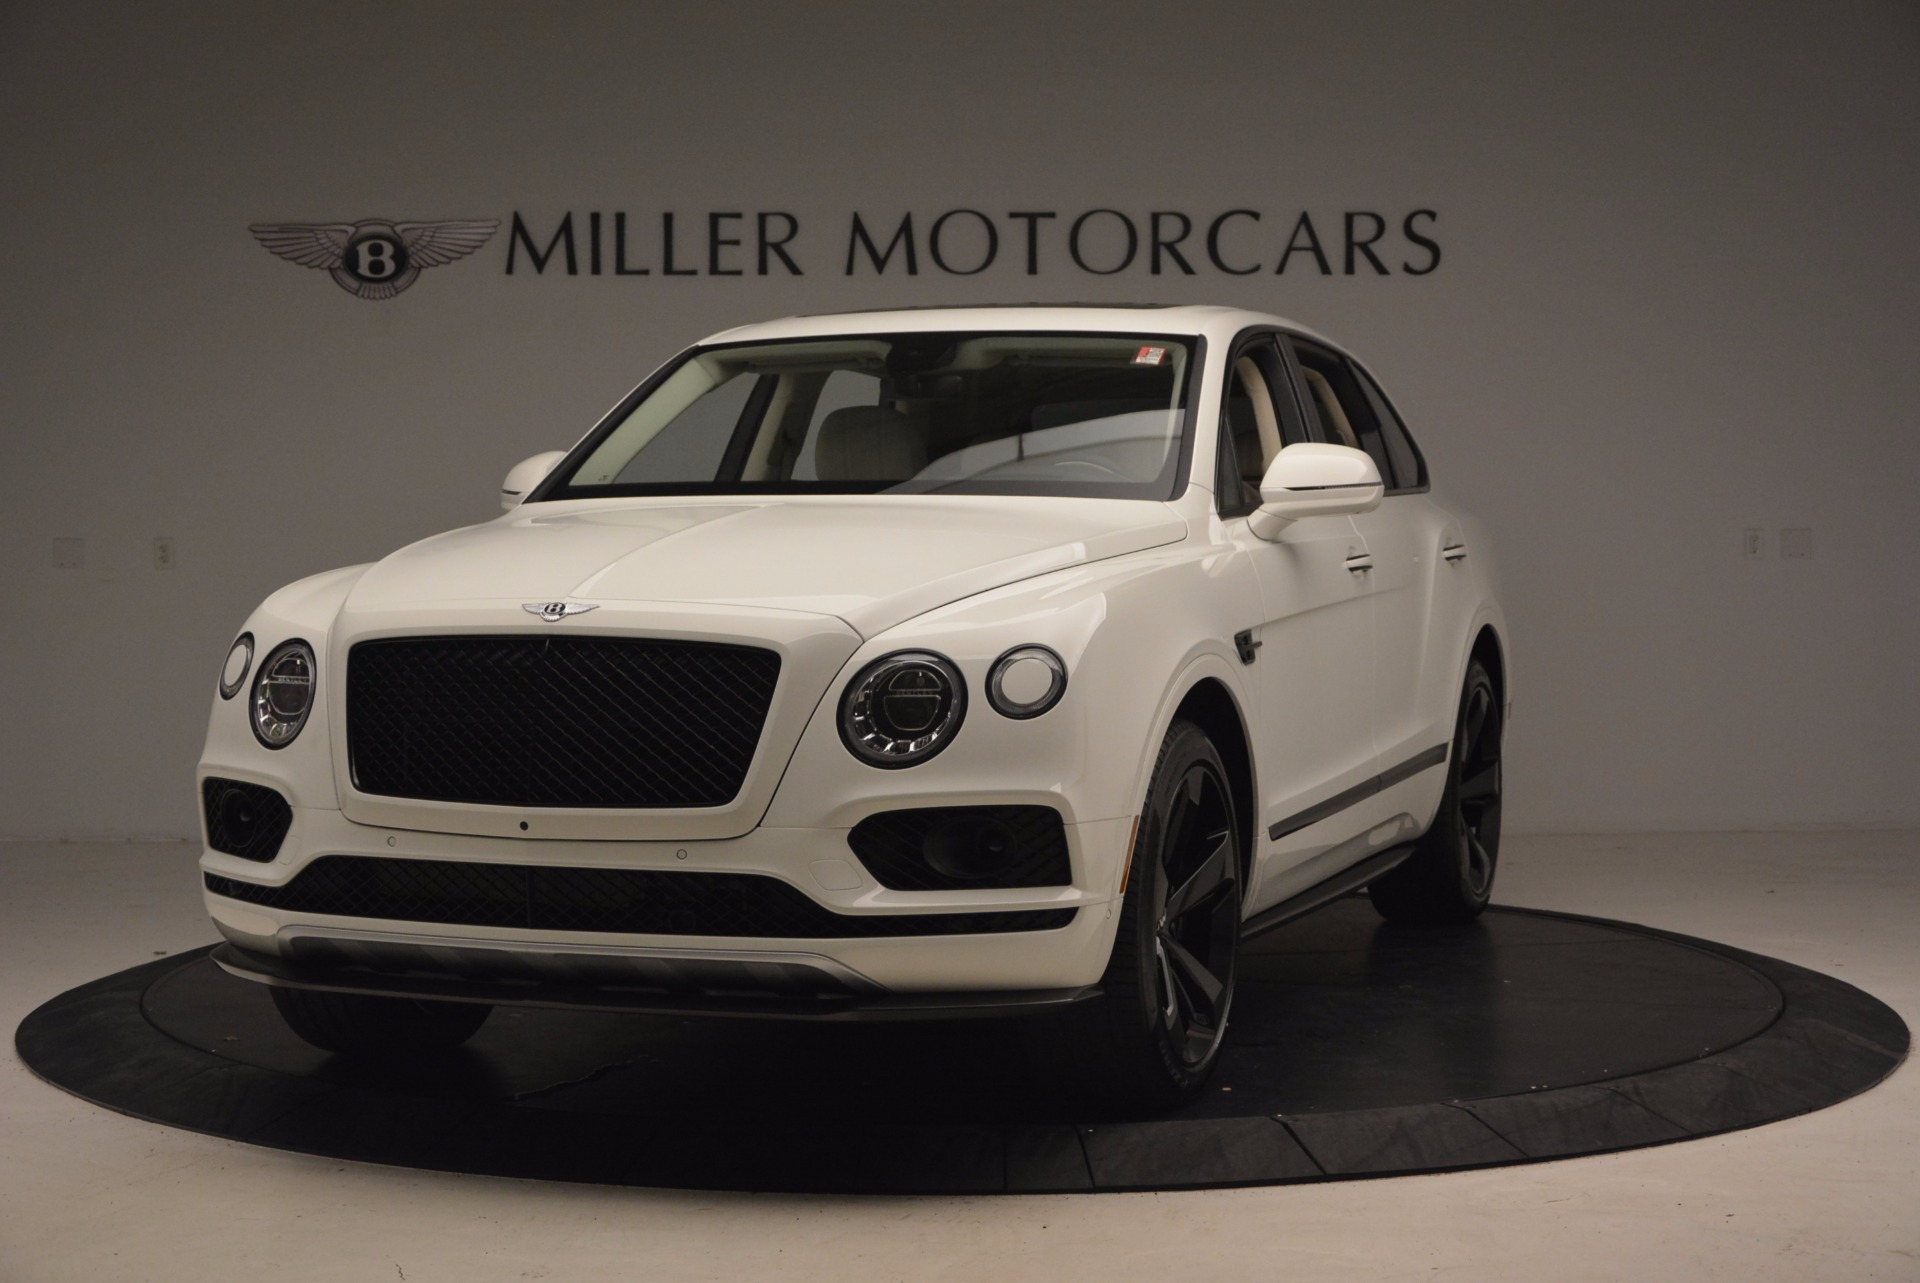 Used 2018 Bentley Bentayga Black Edition for sale Sold at Maserati of Greenwich in Greenwich CT 06830 1